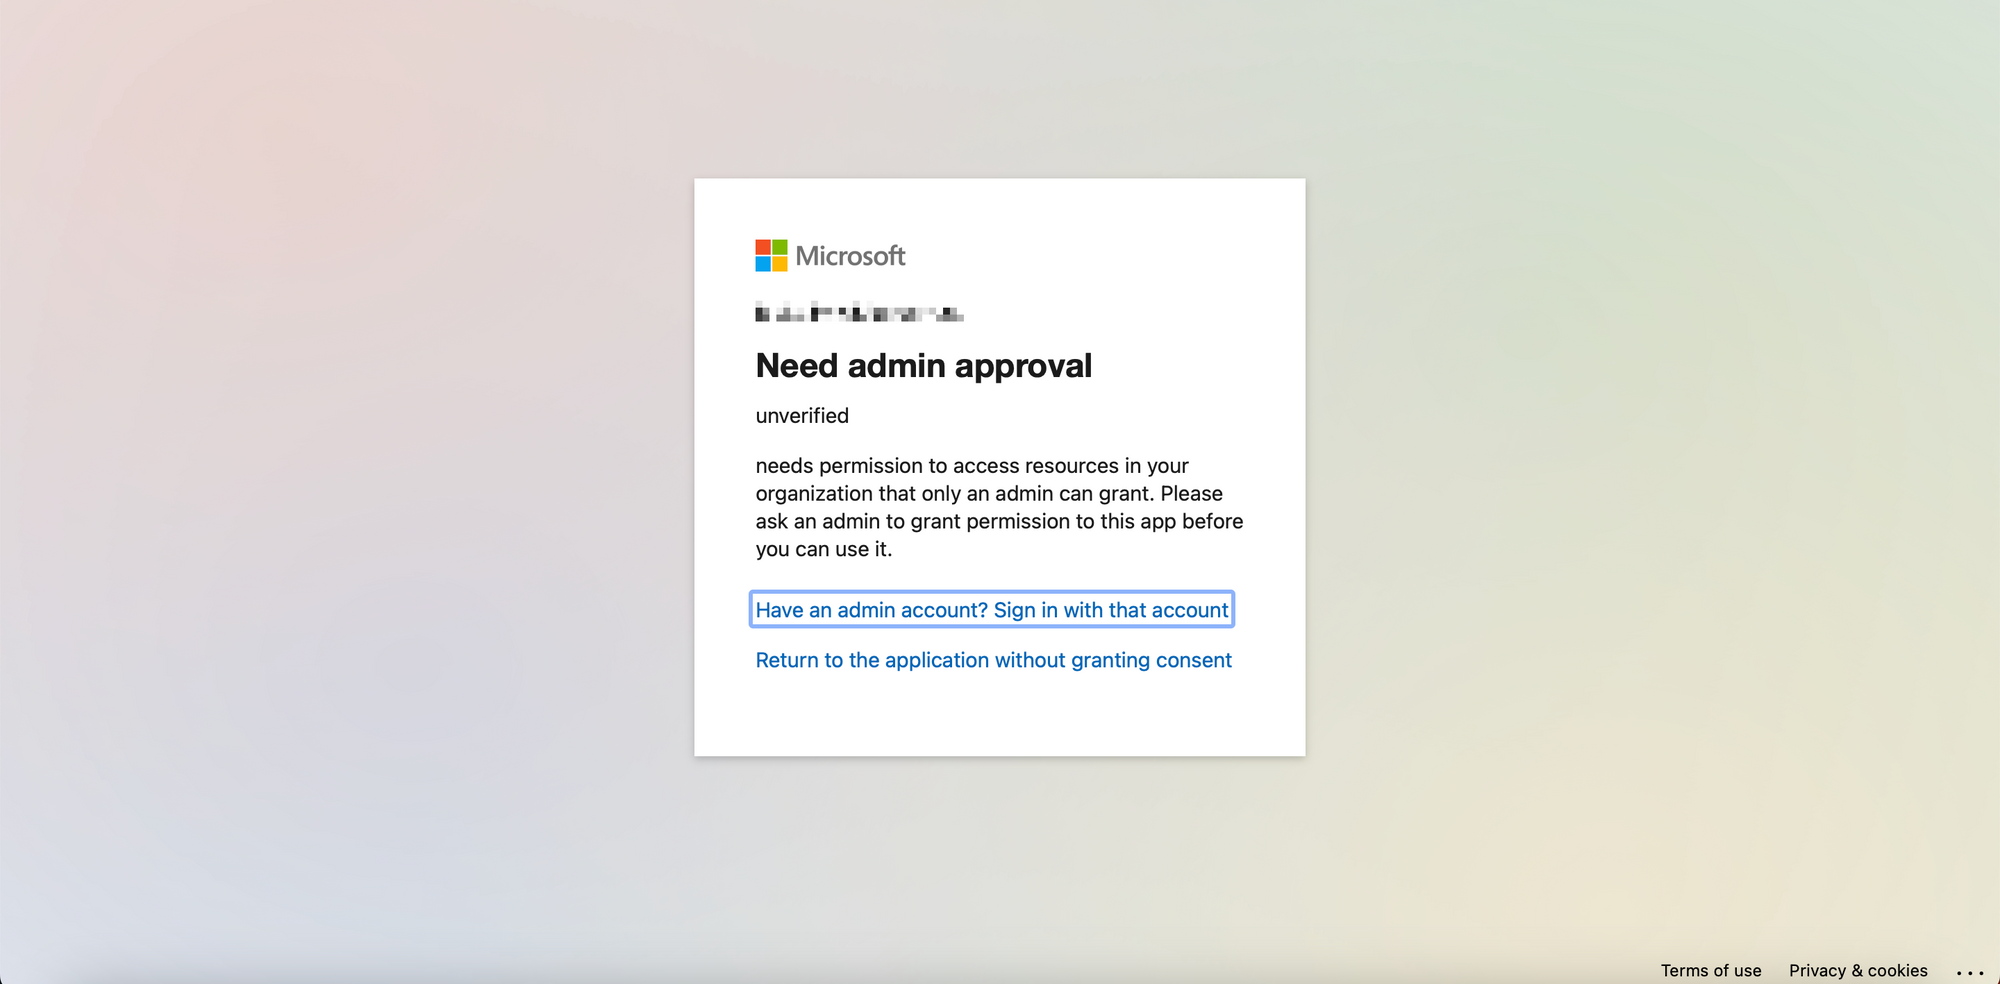 Microsoft's "Need admin approval" screen